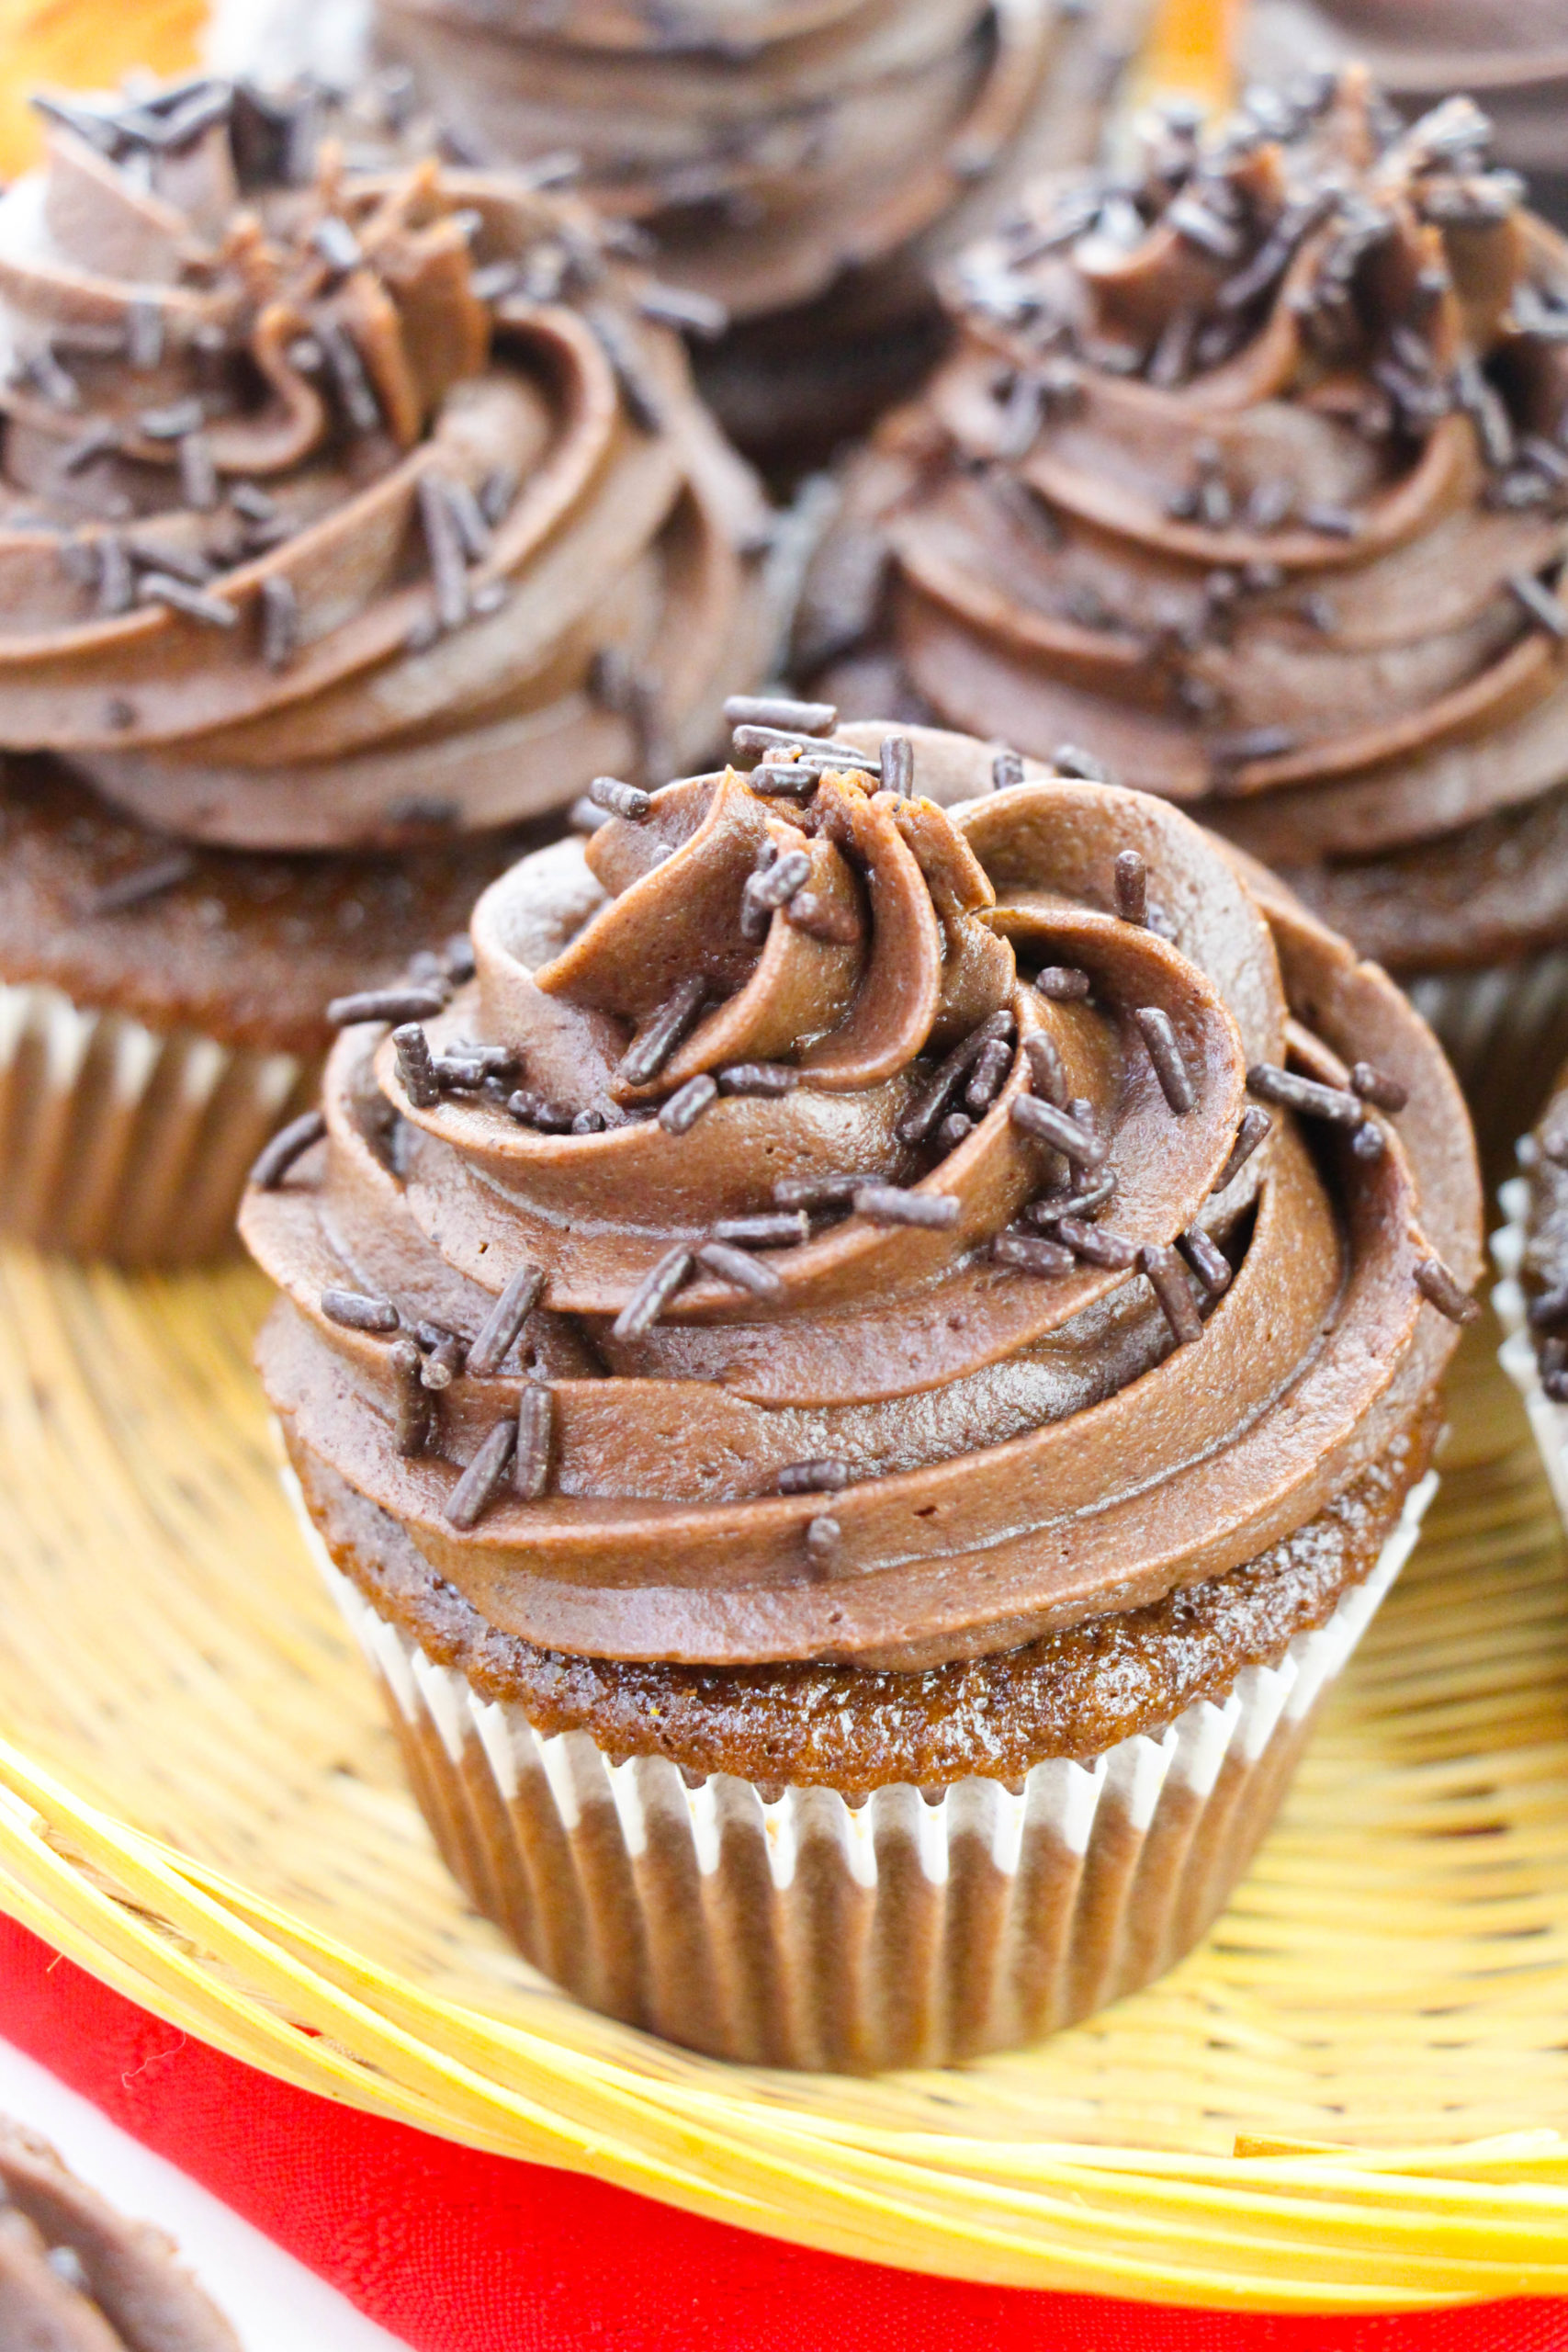  Chocolate Frosted Cupcakes